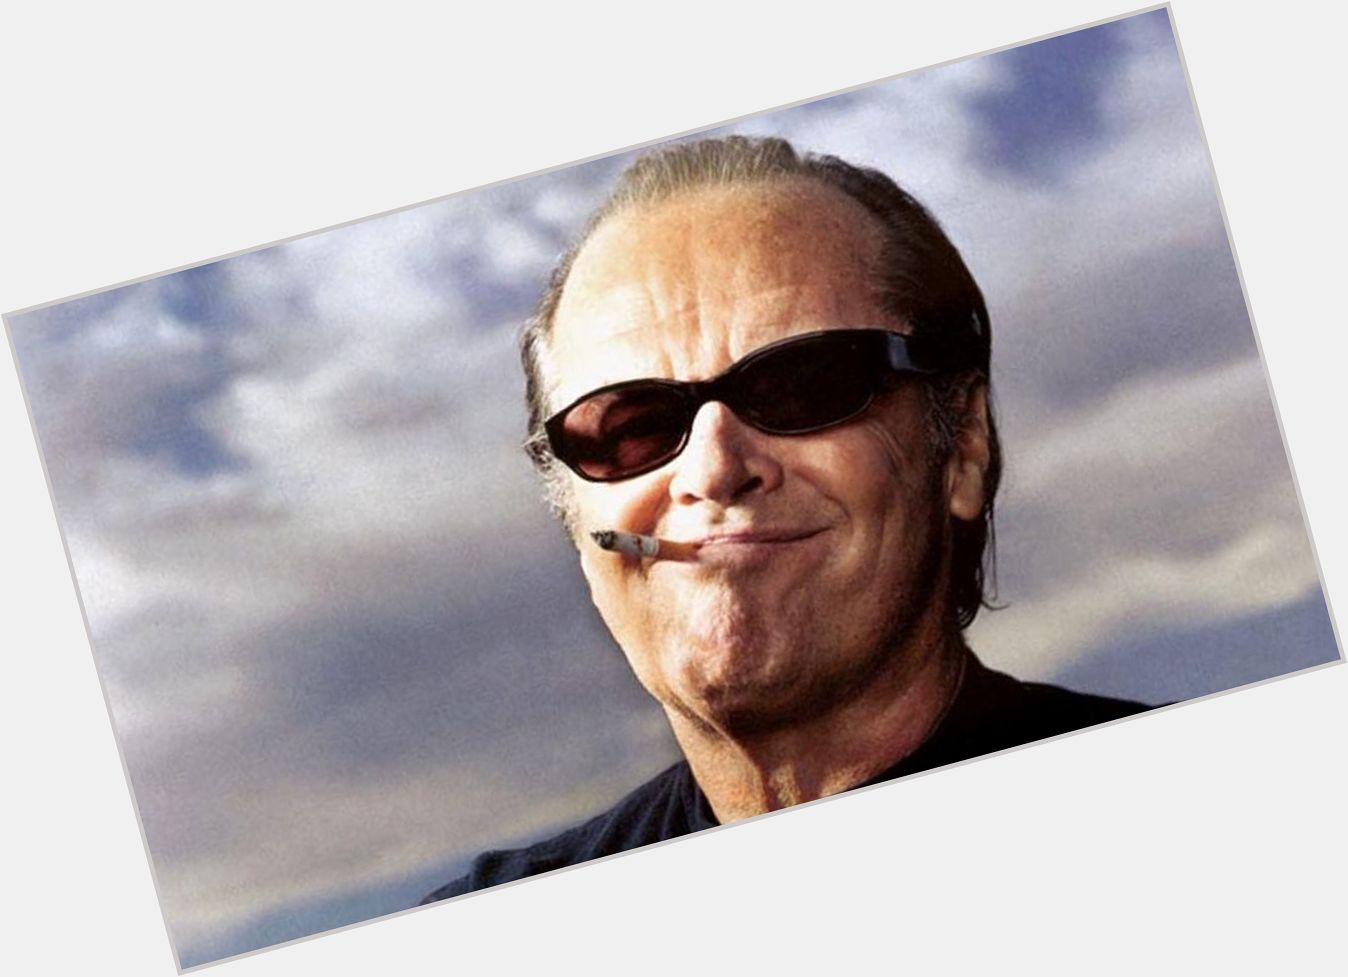 Happy birthday to jack nicholson, most known from his apperance in the profile picture 